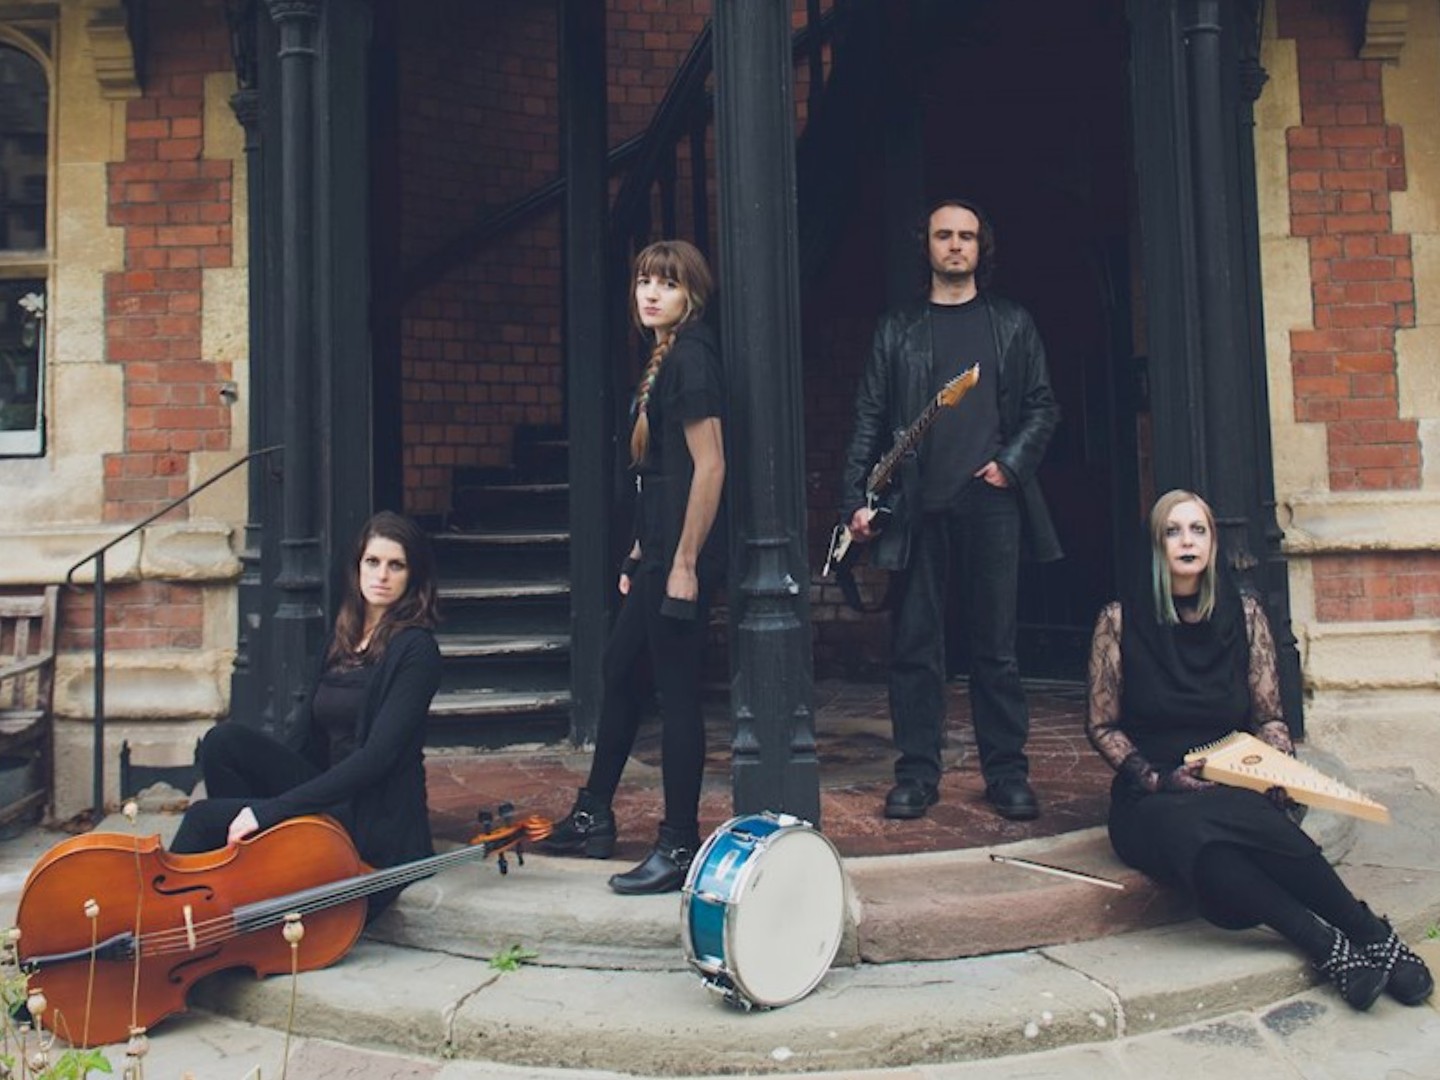 EXCLUSIVE: Dead Space Chamber Music 'The Black Hours' Album Premiere 2